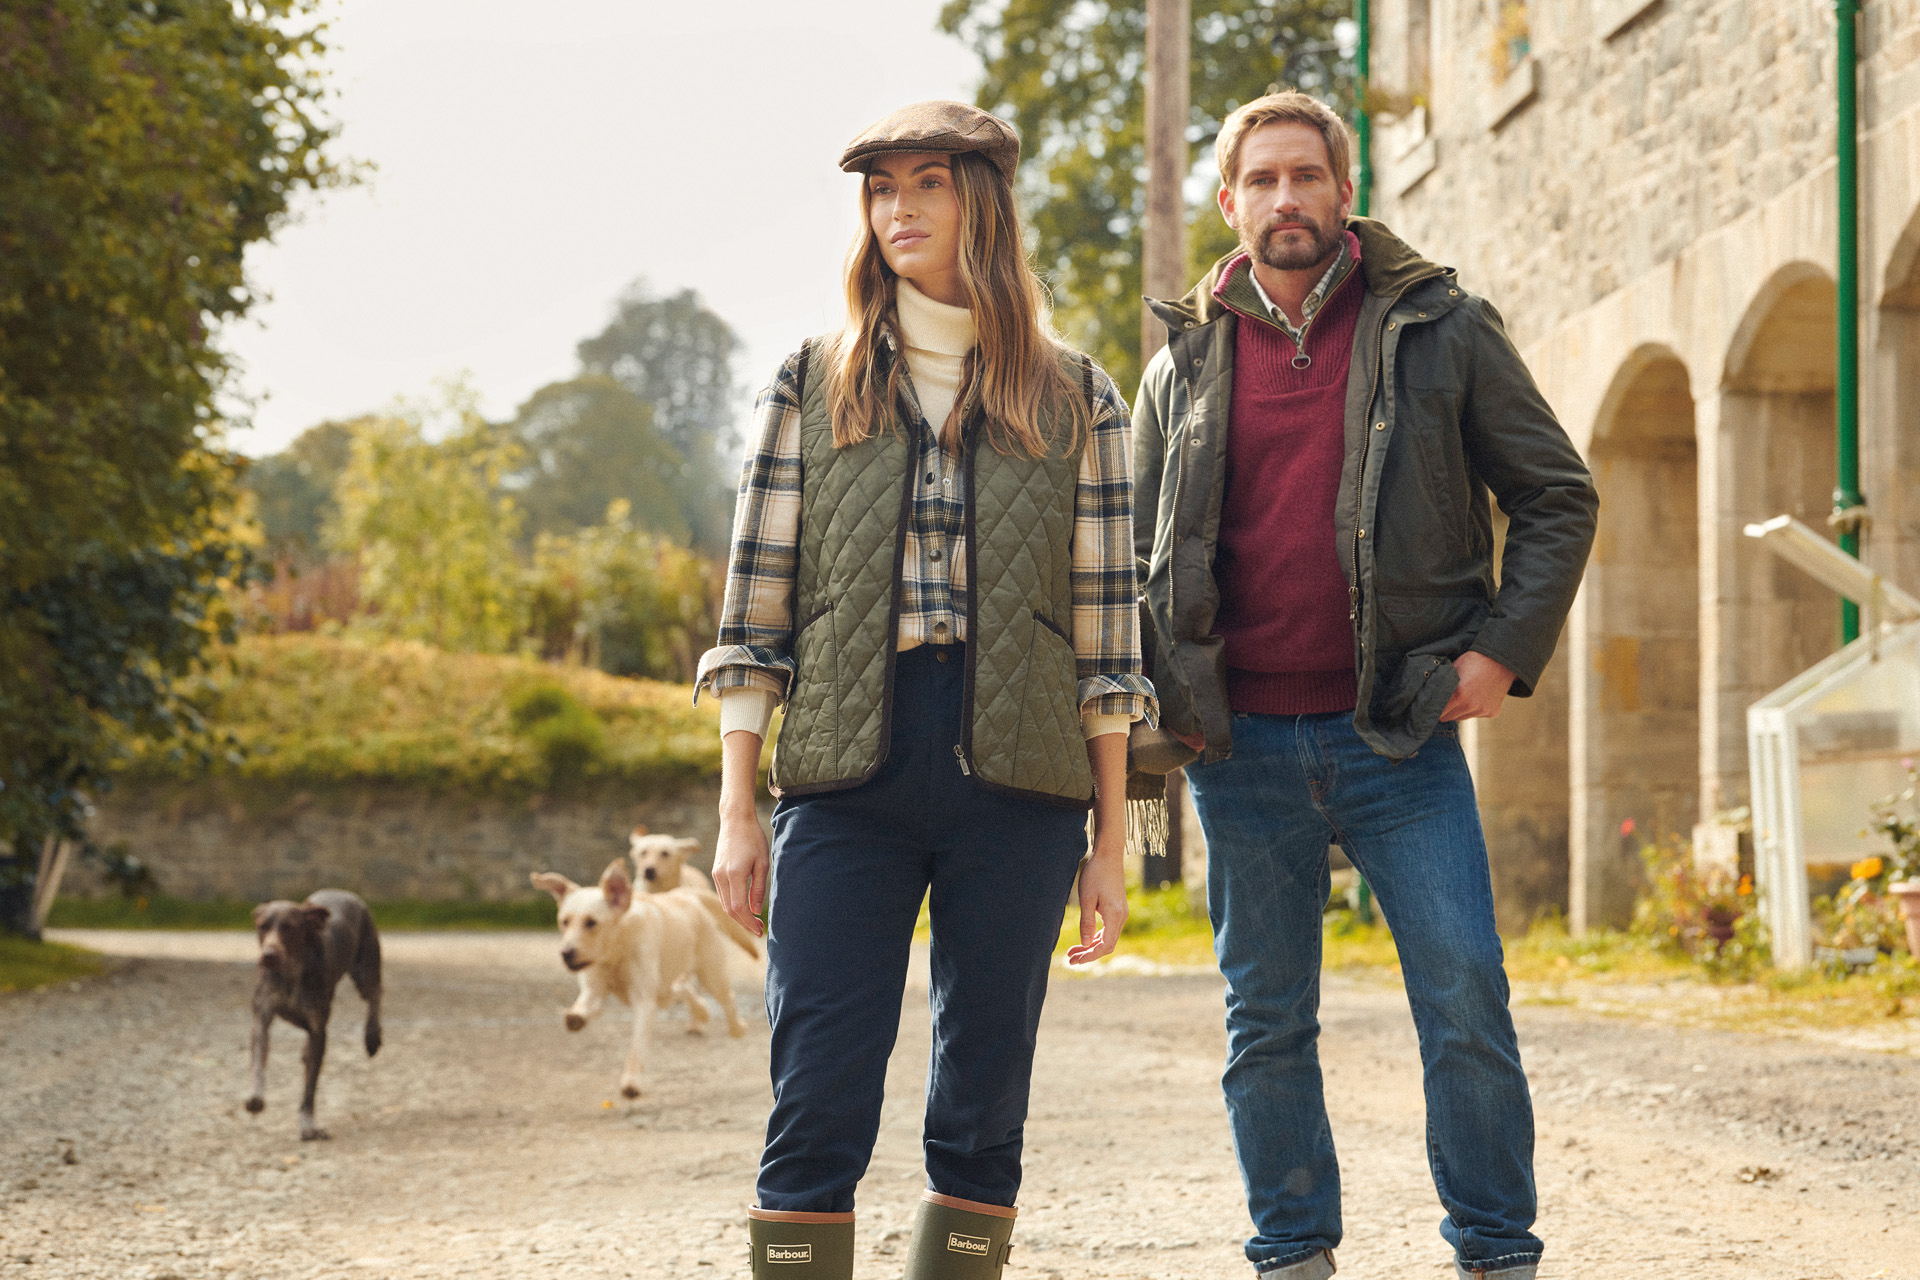 Barbour: The Heritage & Lifestyle Brand Celebrates 130 Years